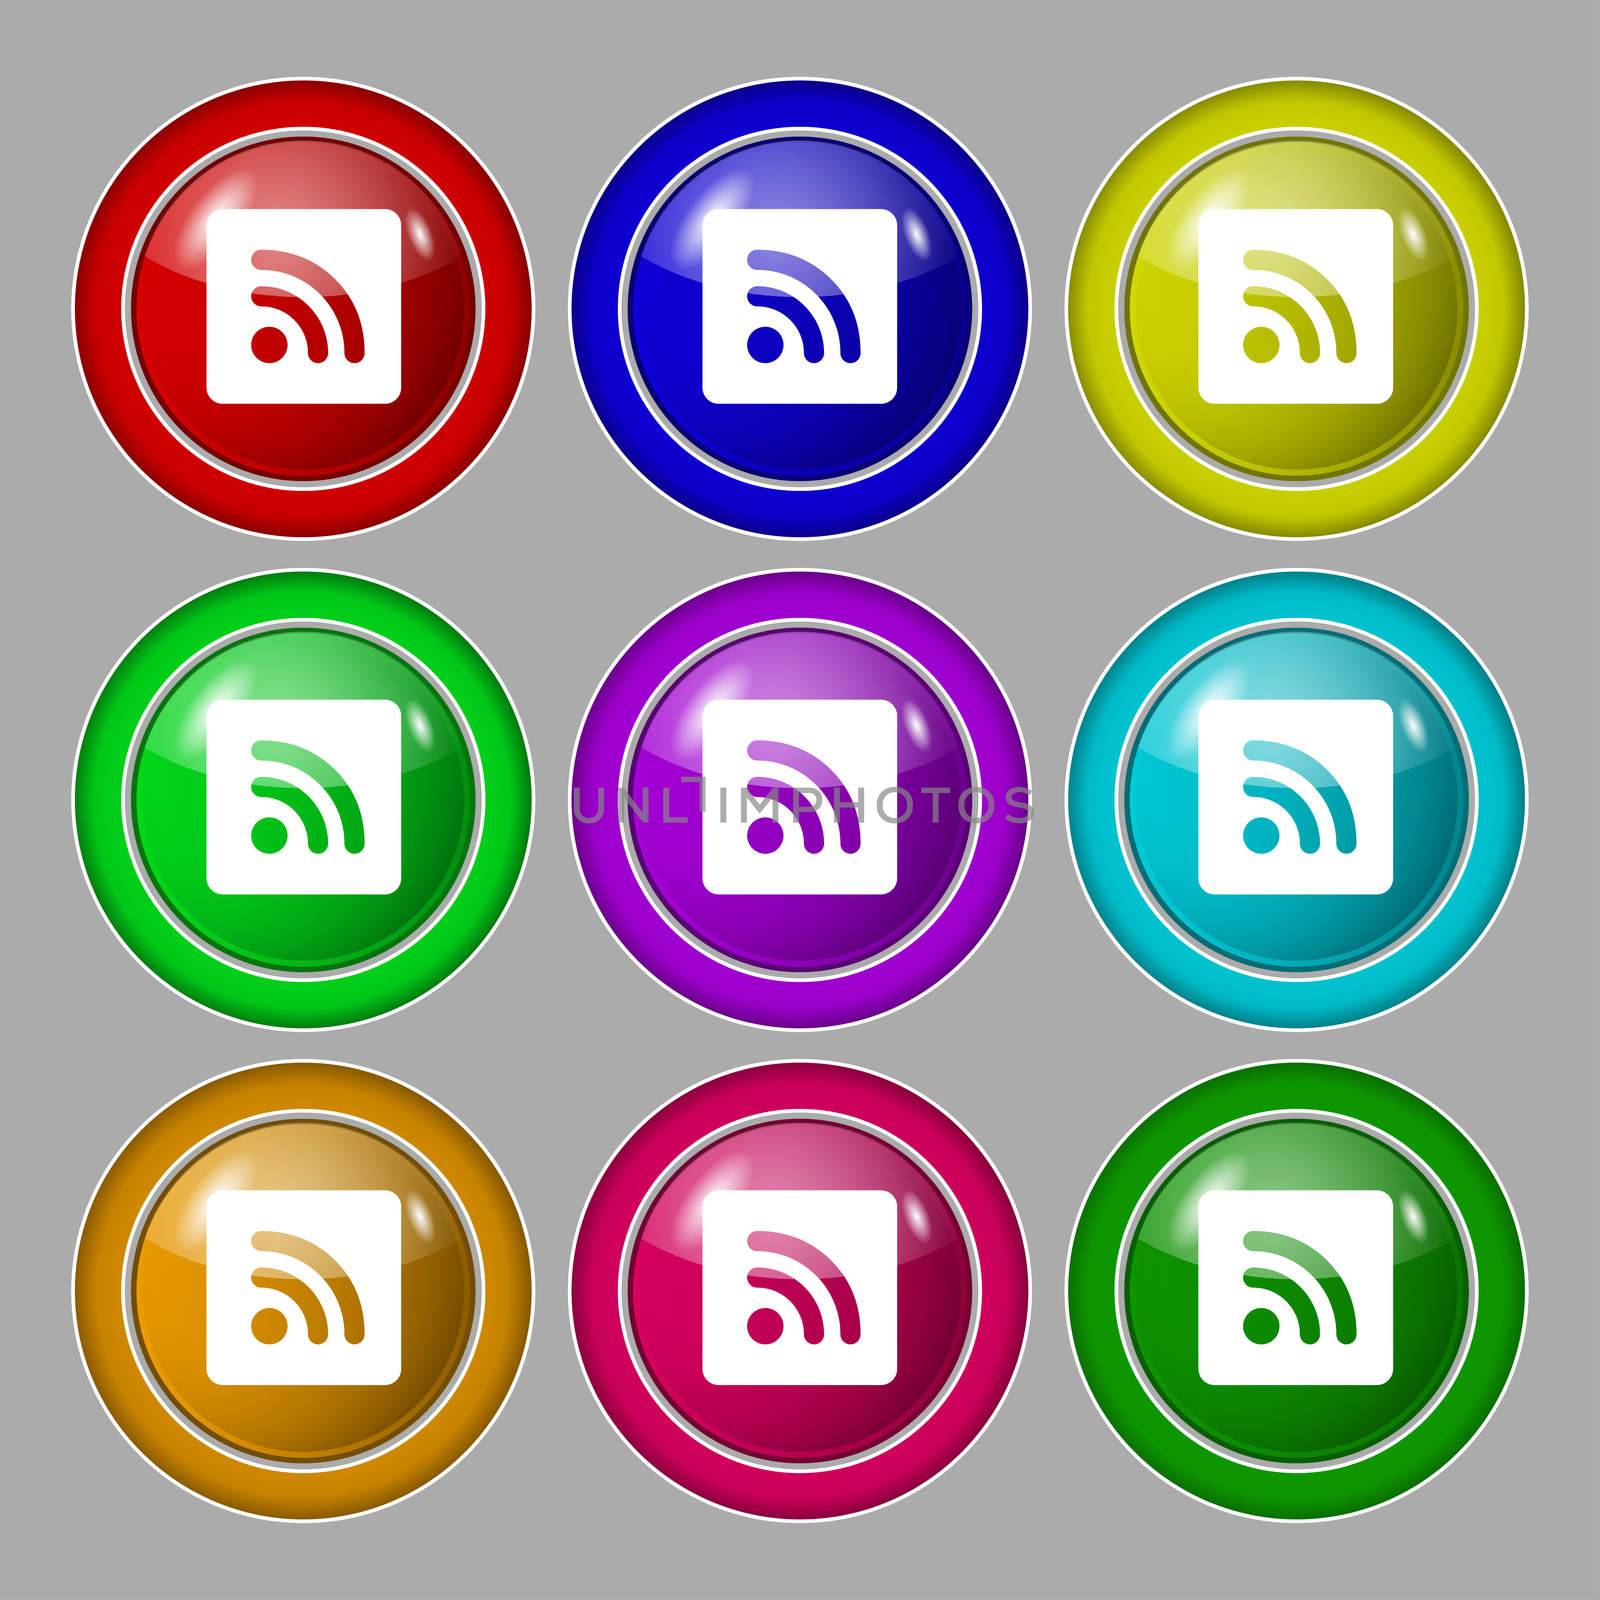 RSS feed icon sign. symbol on nine round colourful buttons. illustration